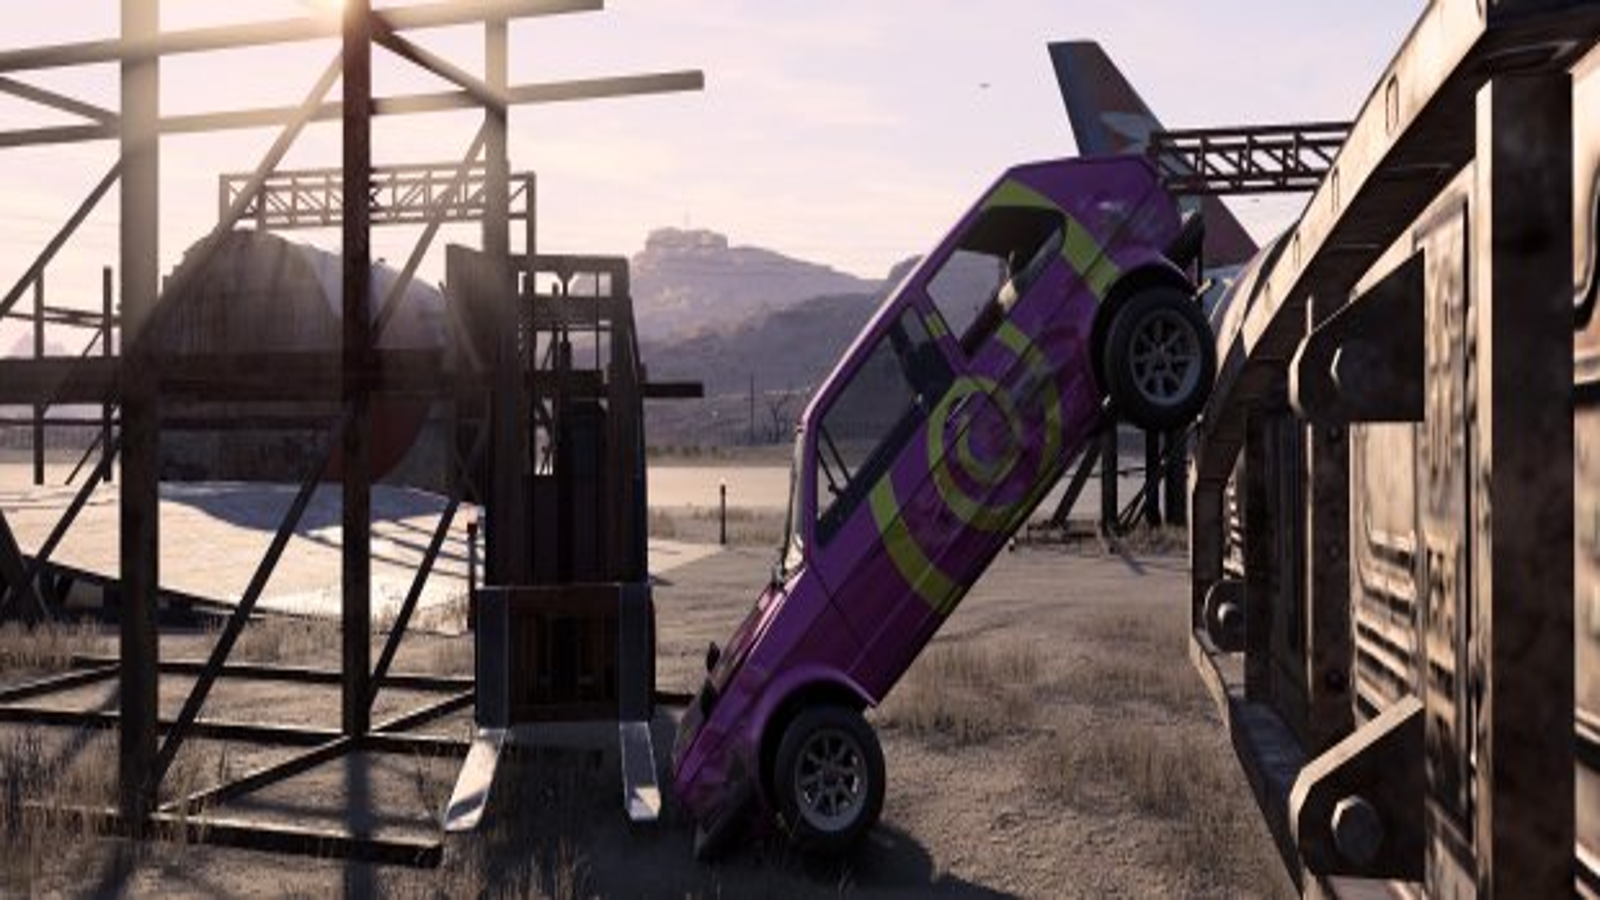 Need for Speed Payback Review - A Risky Bet - Game Informer